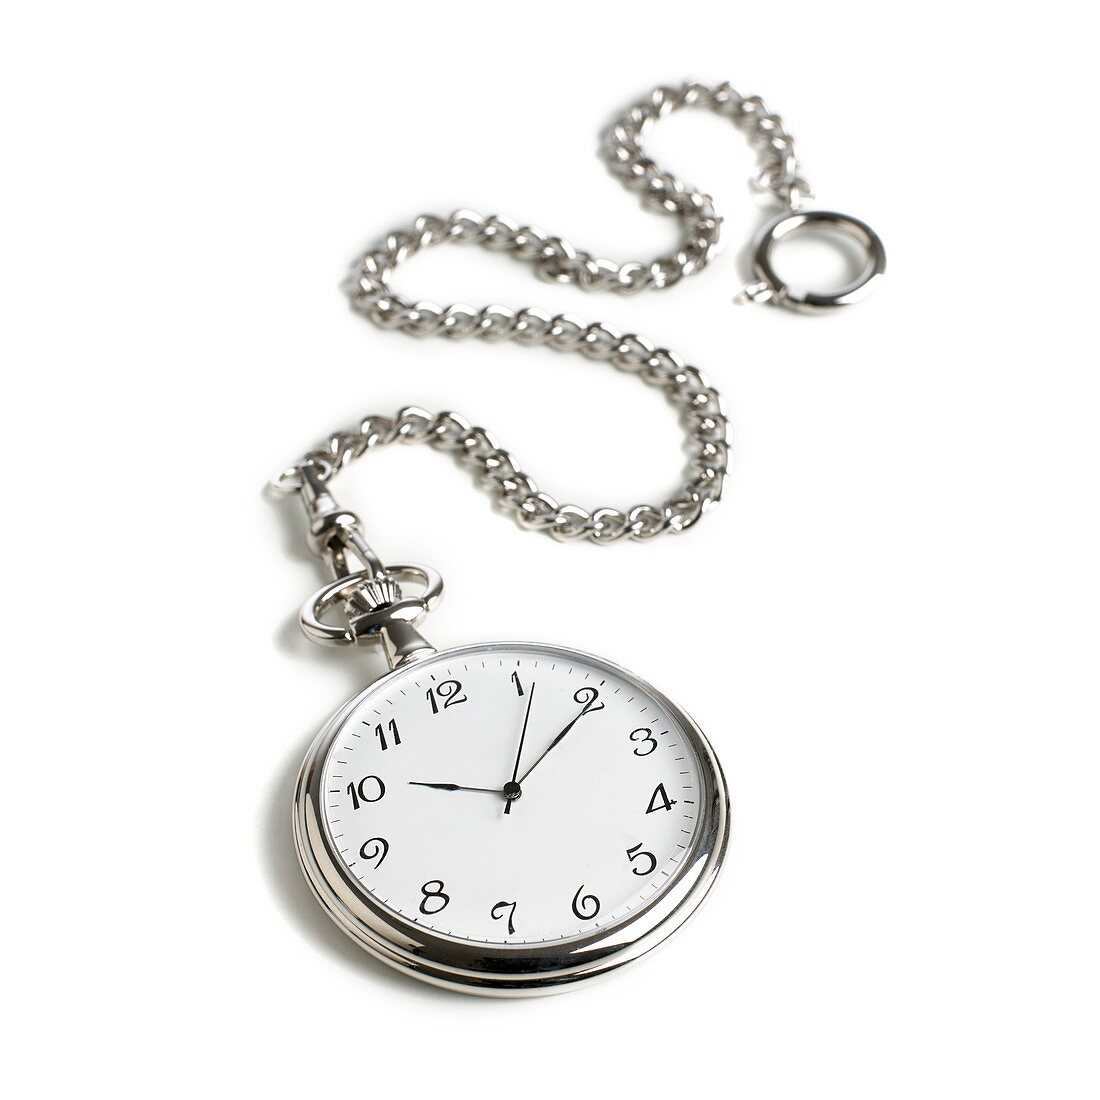 Traditional pocket watch